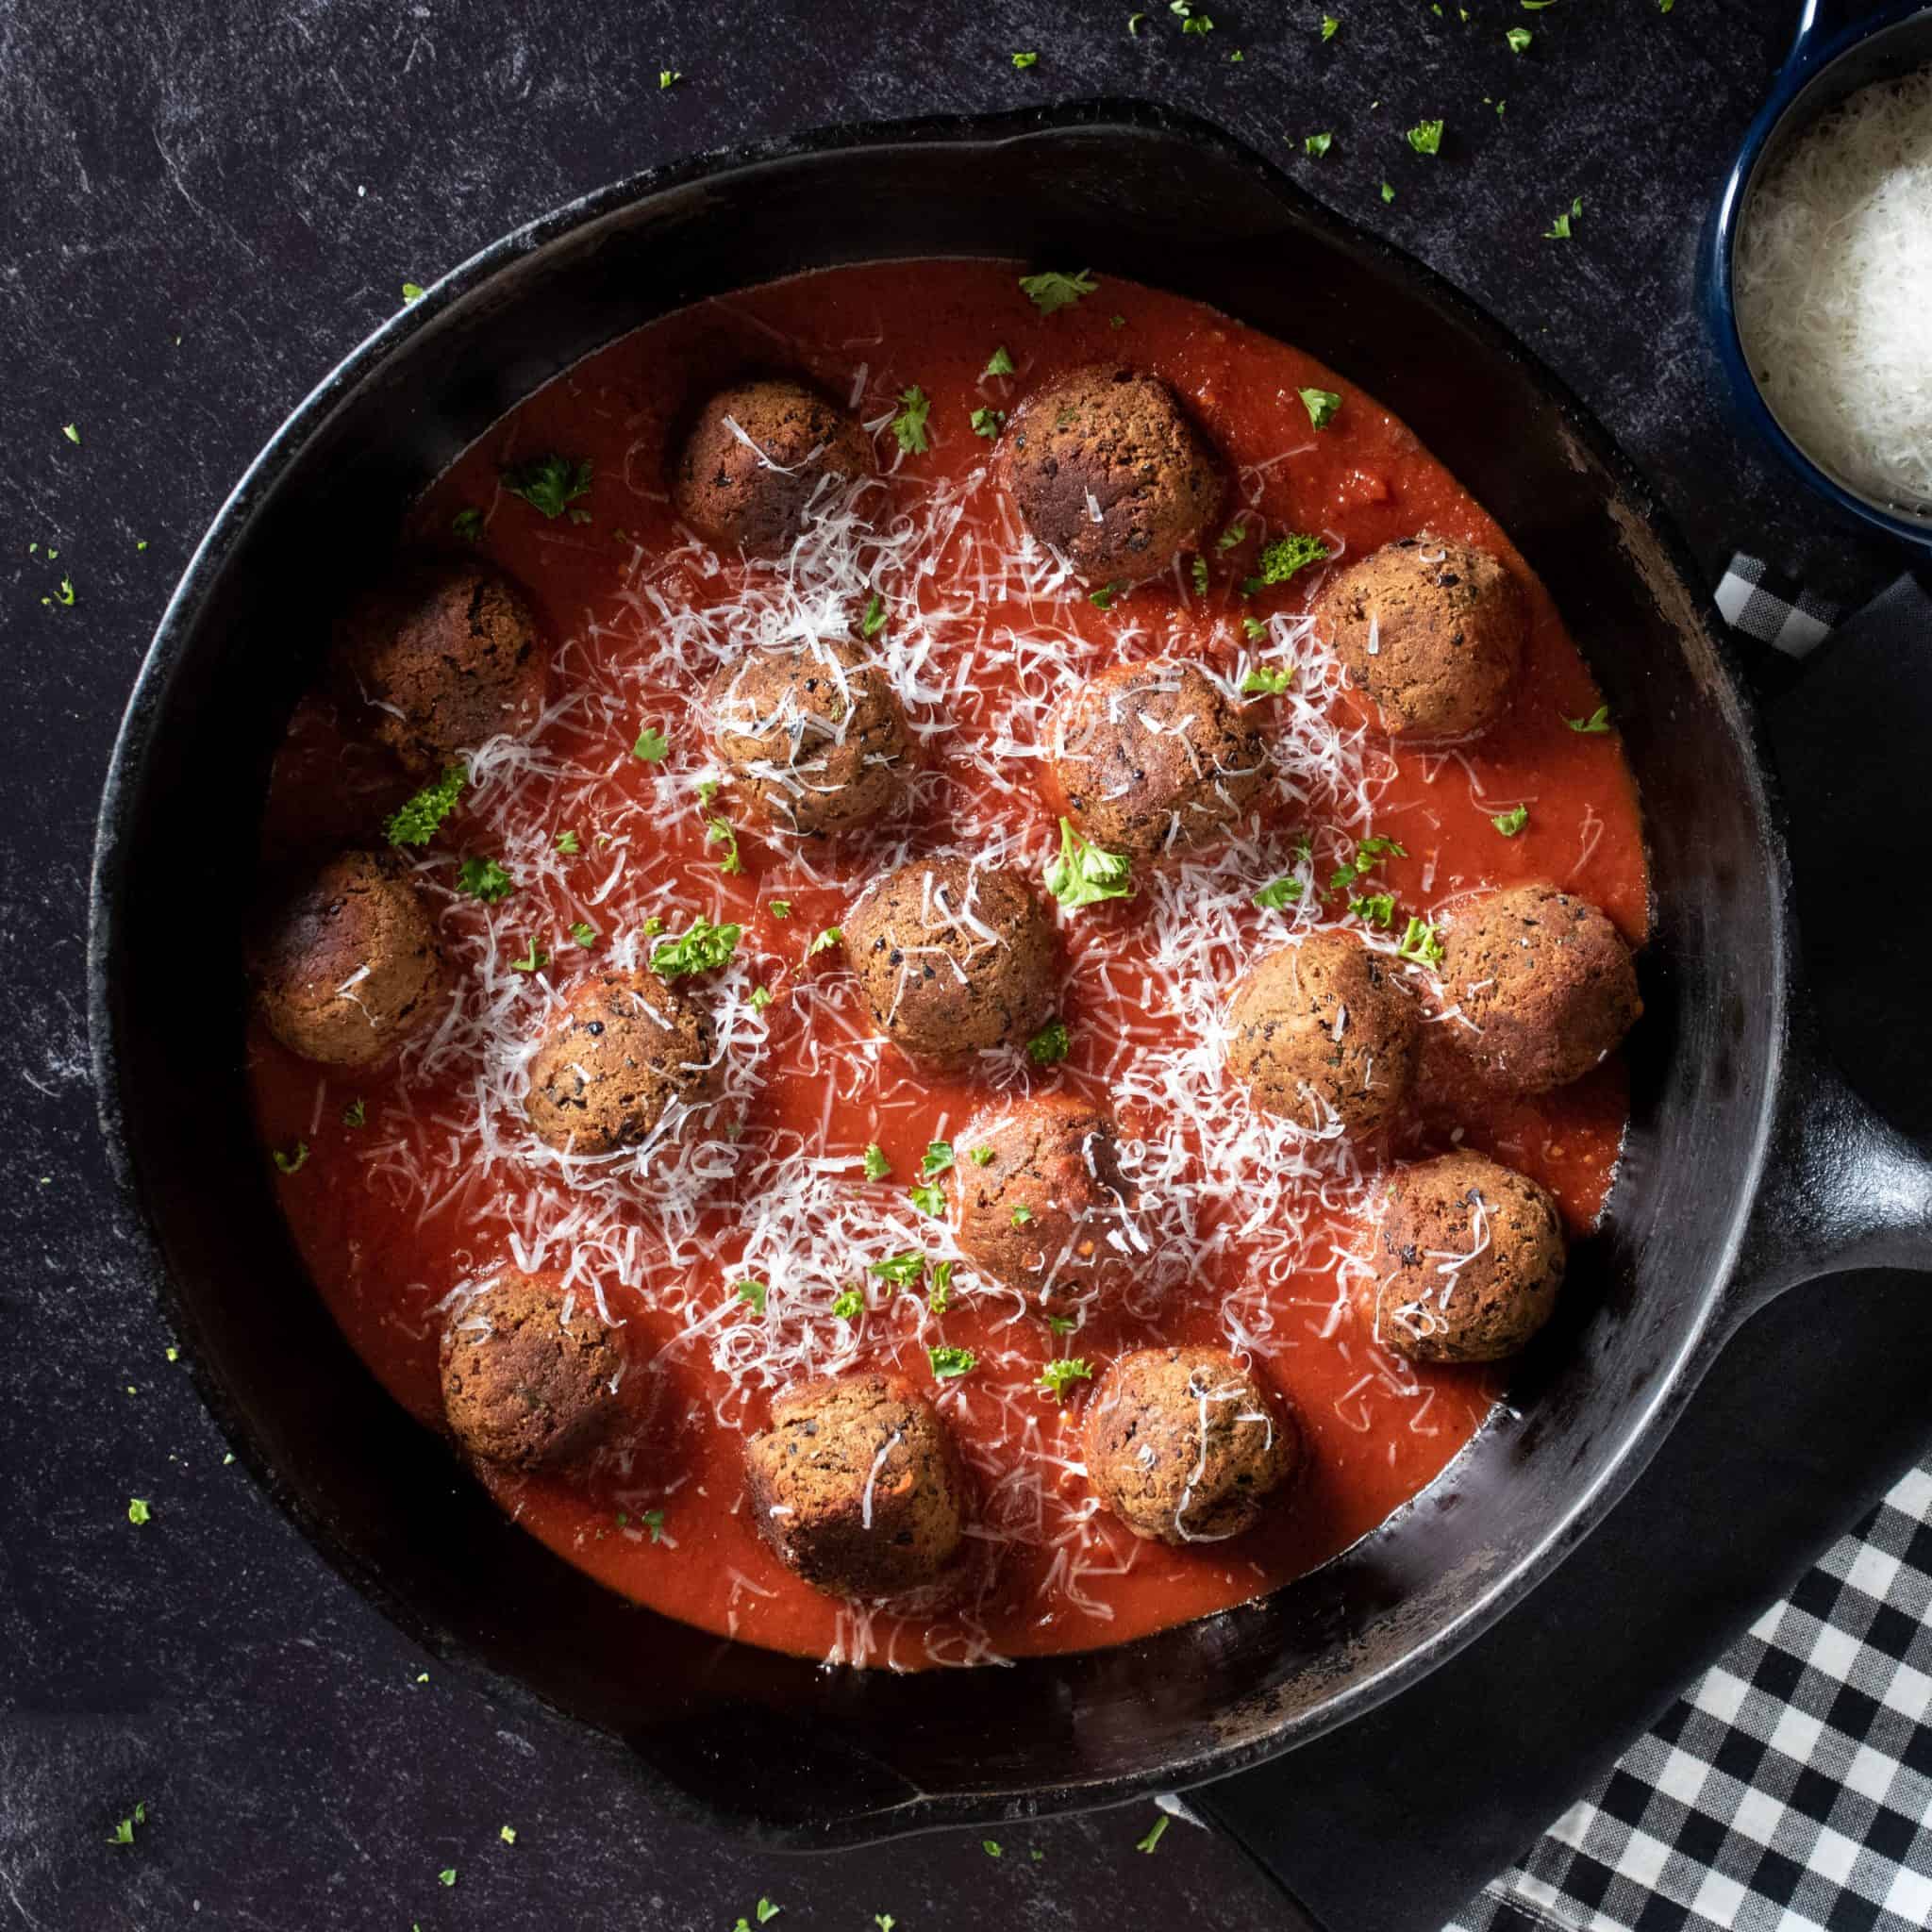 meatballs made of black beans in a large cast iron skillet with marinara sauce.